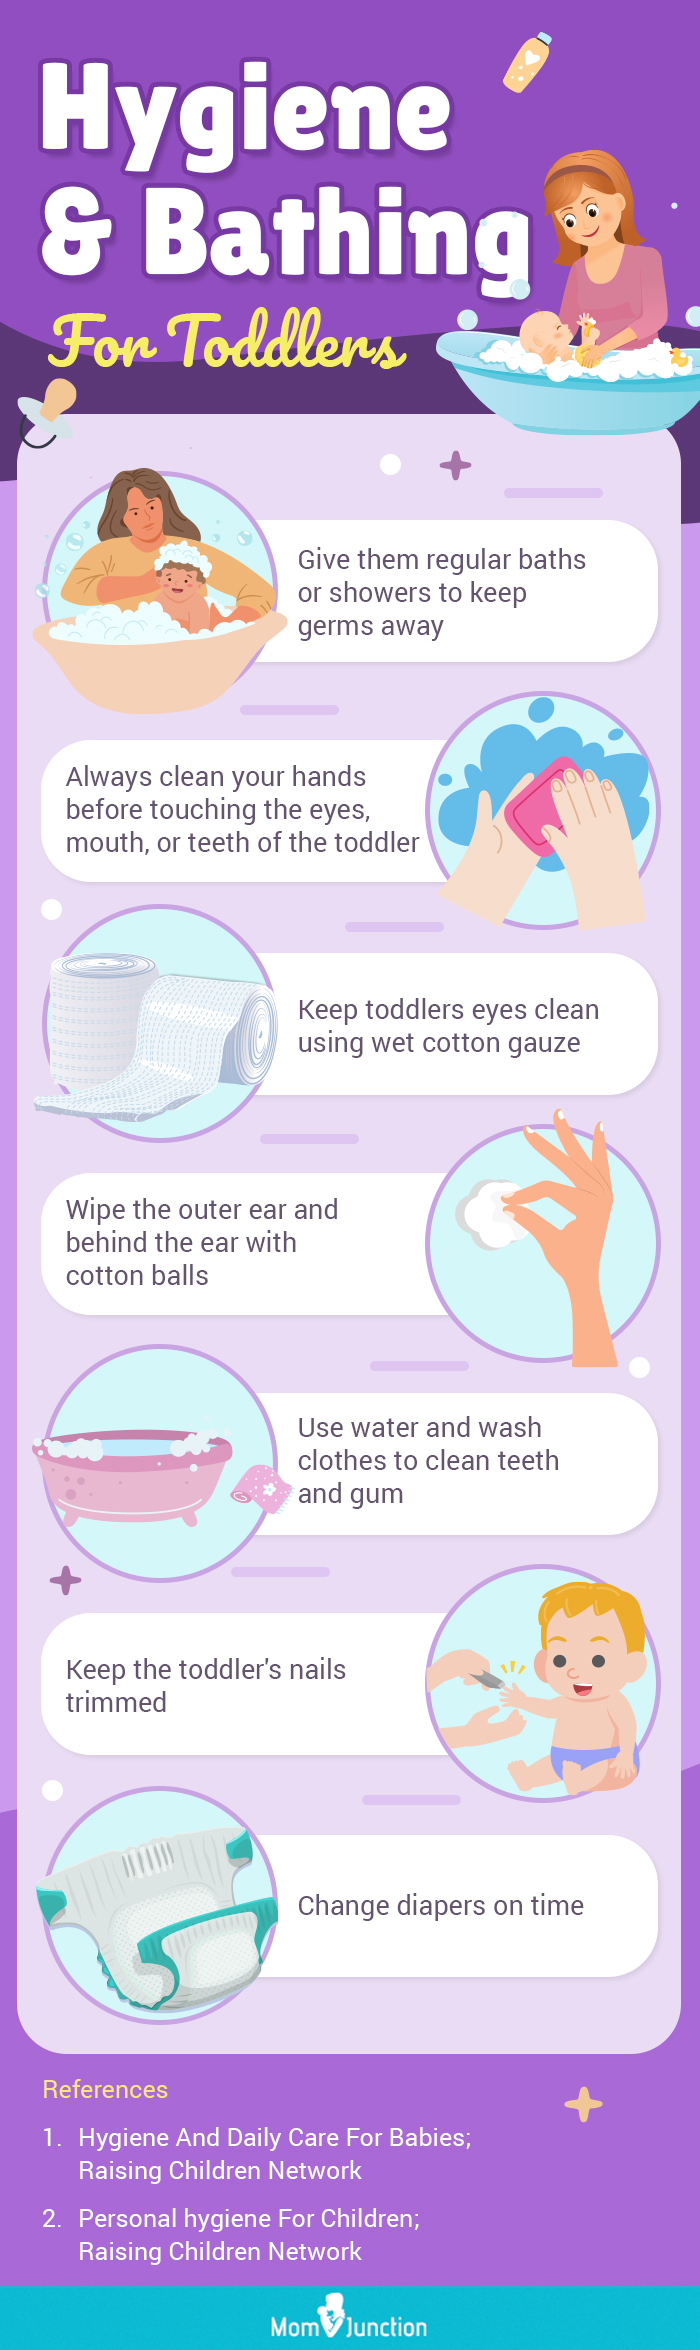 hygiene and bathing for toddlers (infographic)